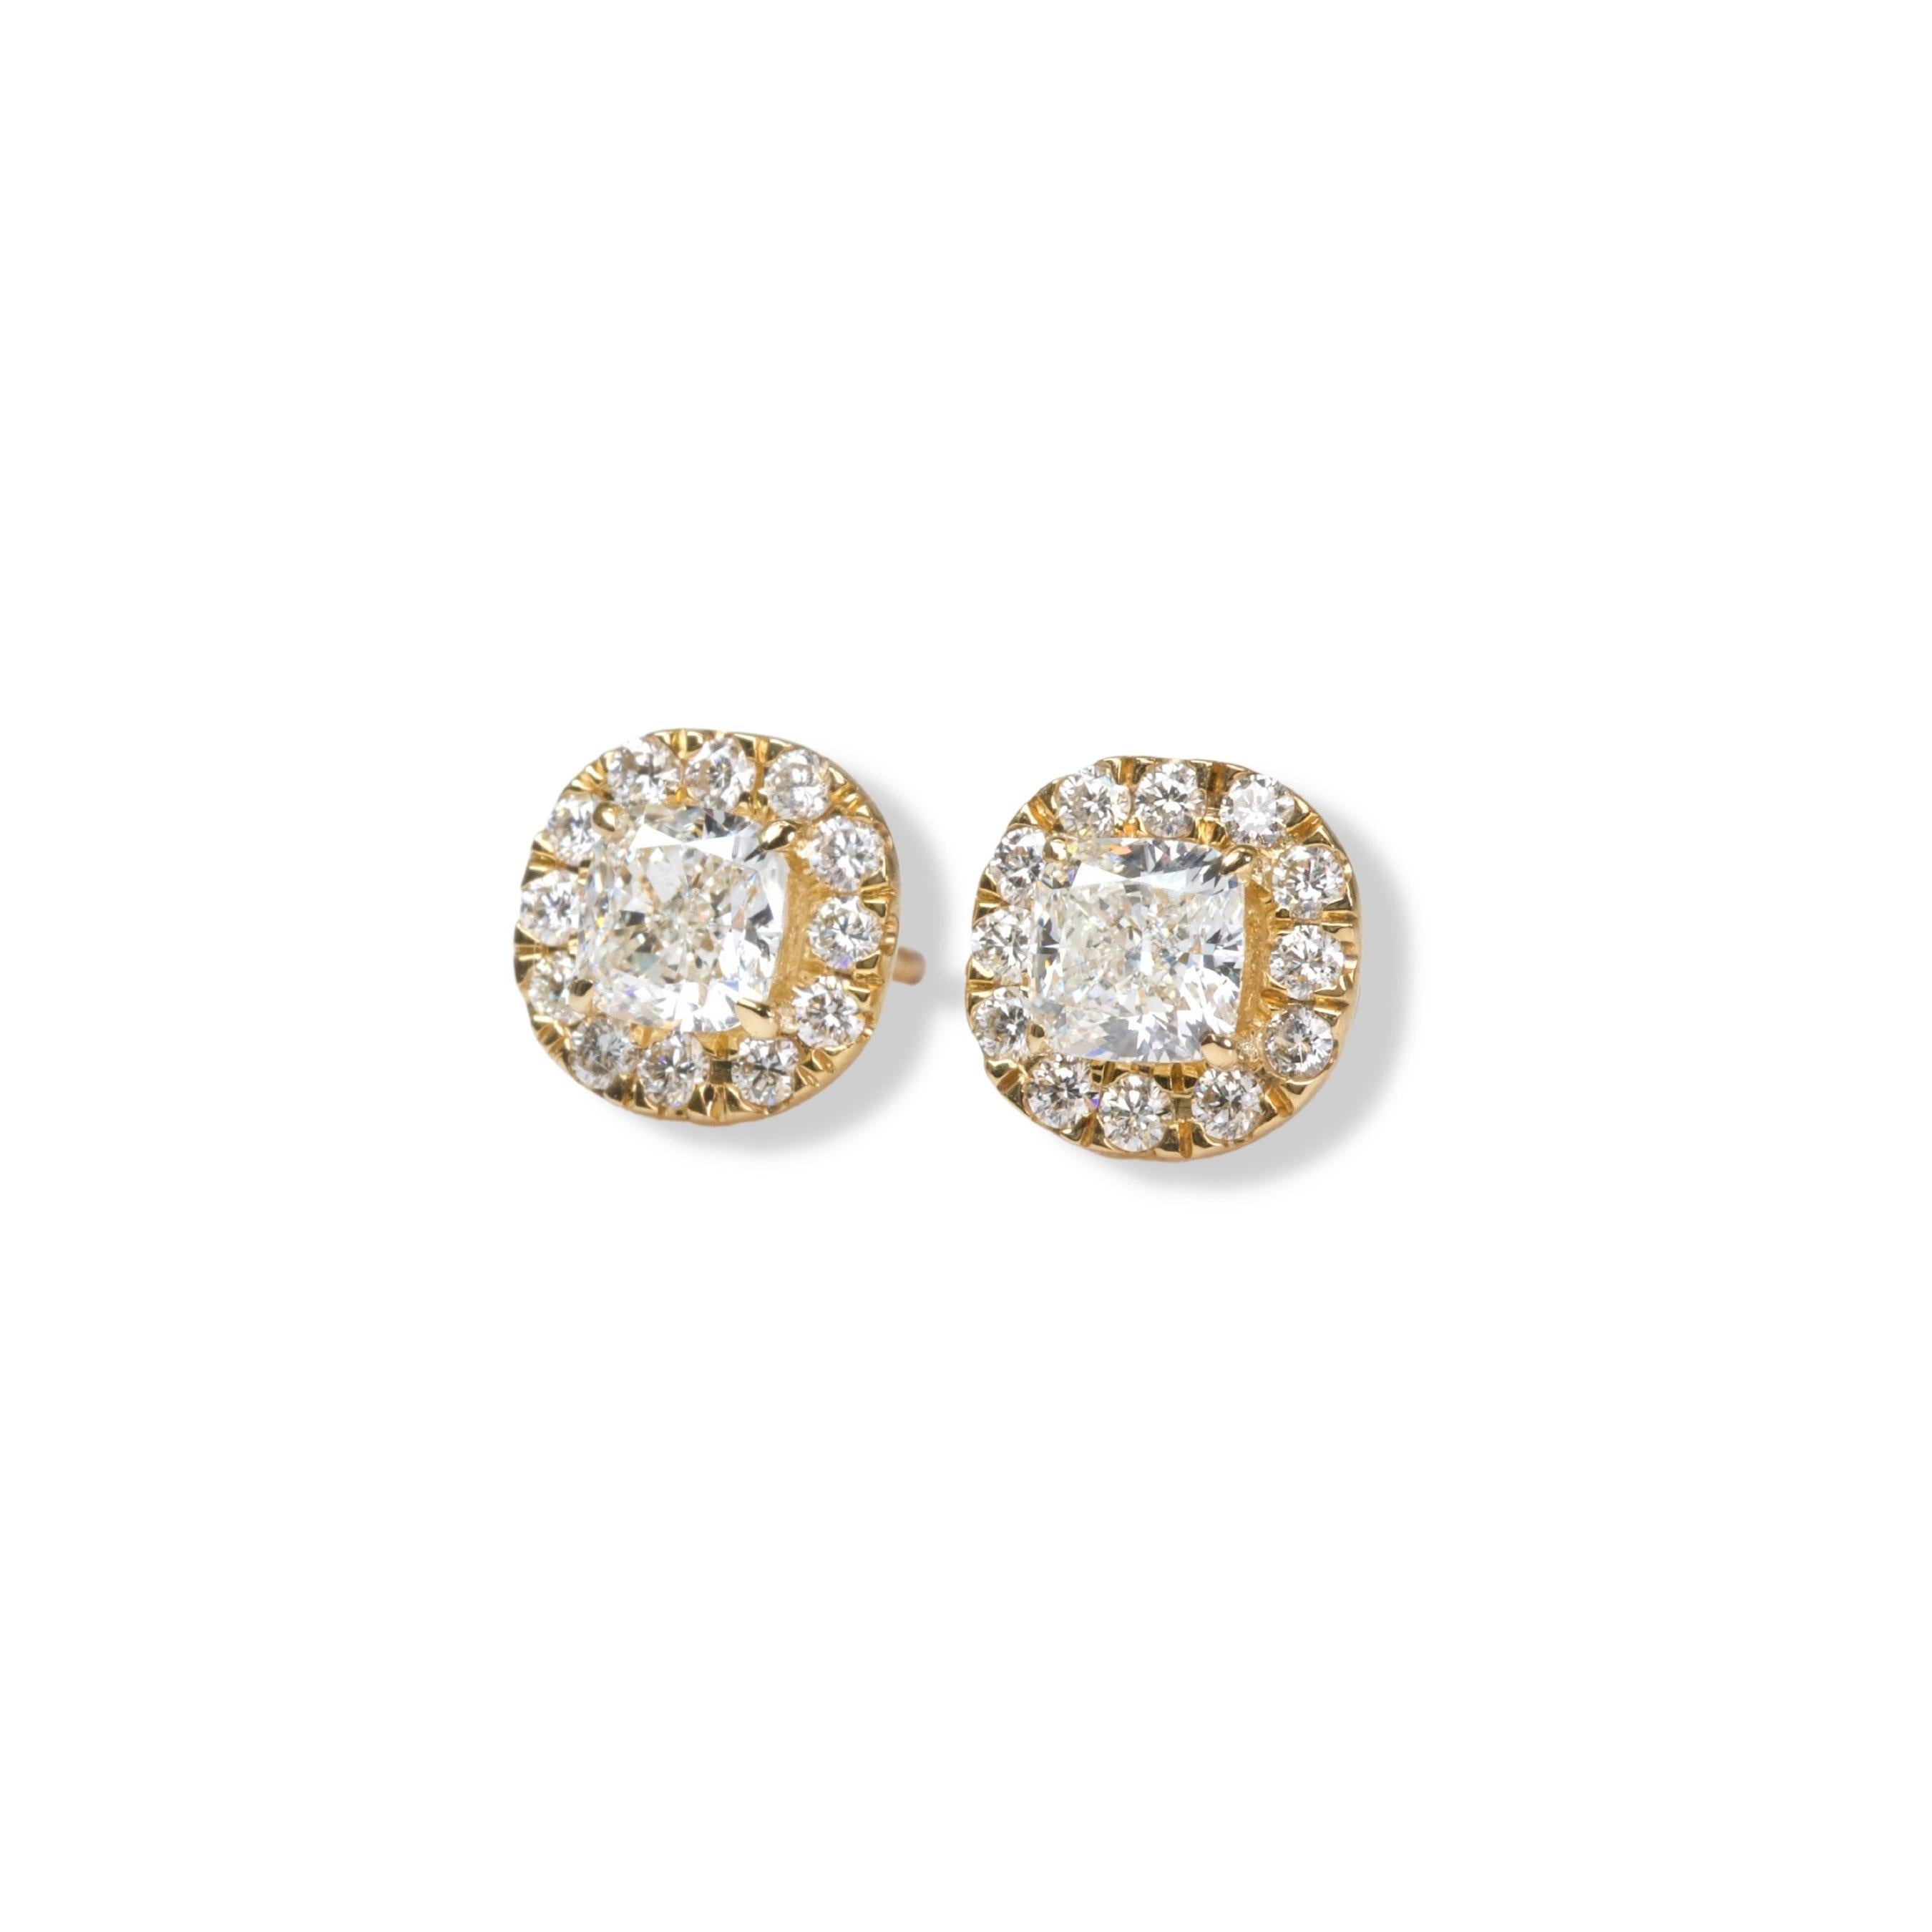 Sparkling 18k Yellow Gold Stud Halo Earrings with 1.40 Diamonds, GIA certificate For Sale 5